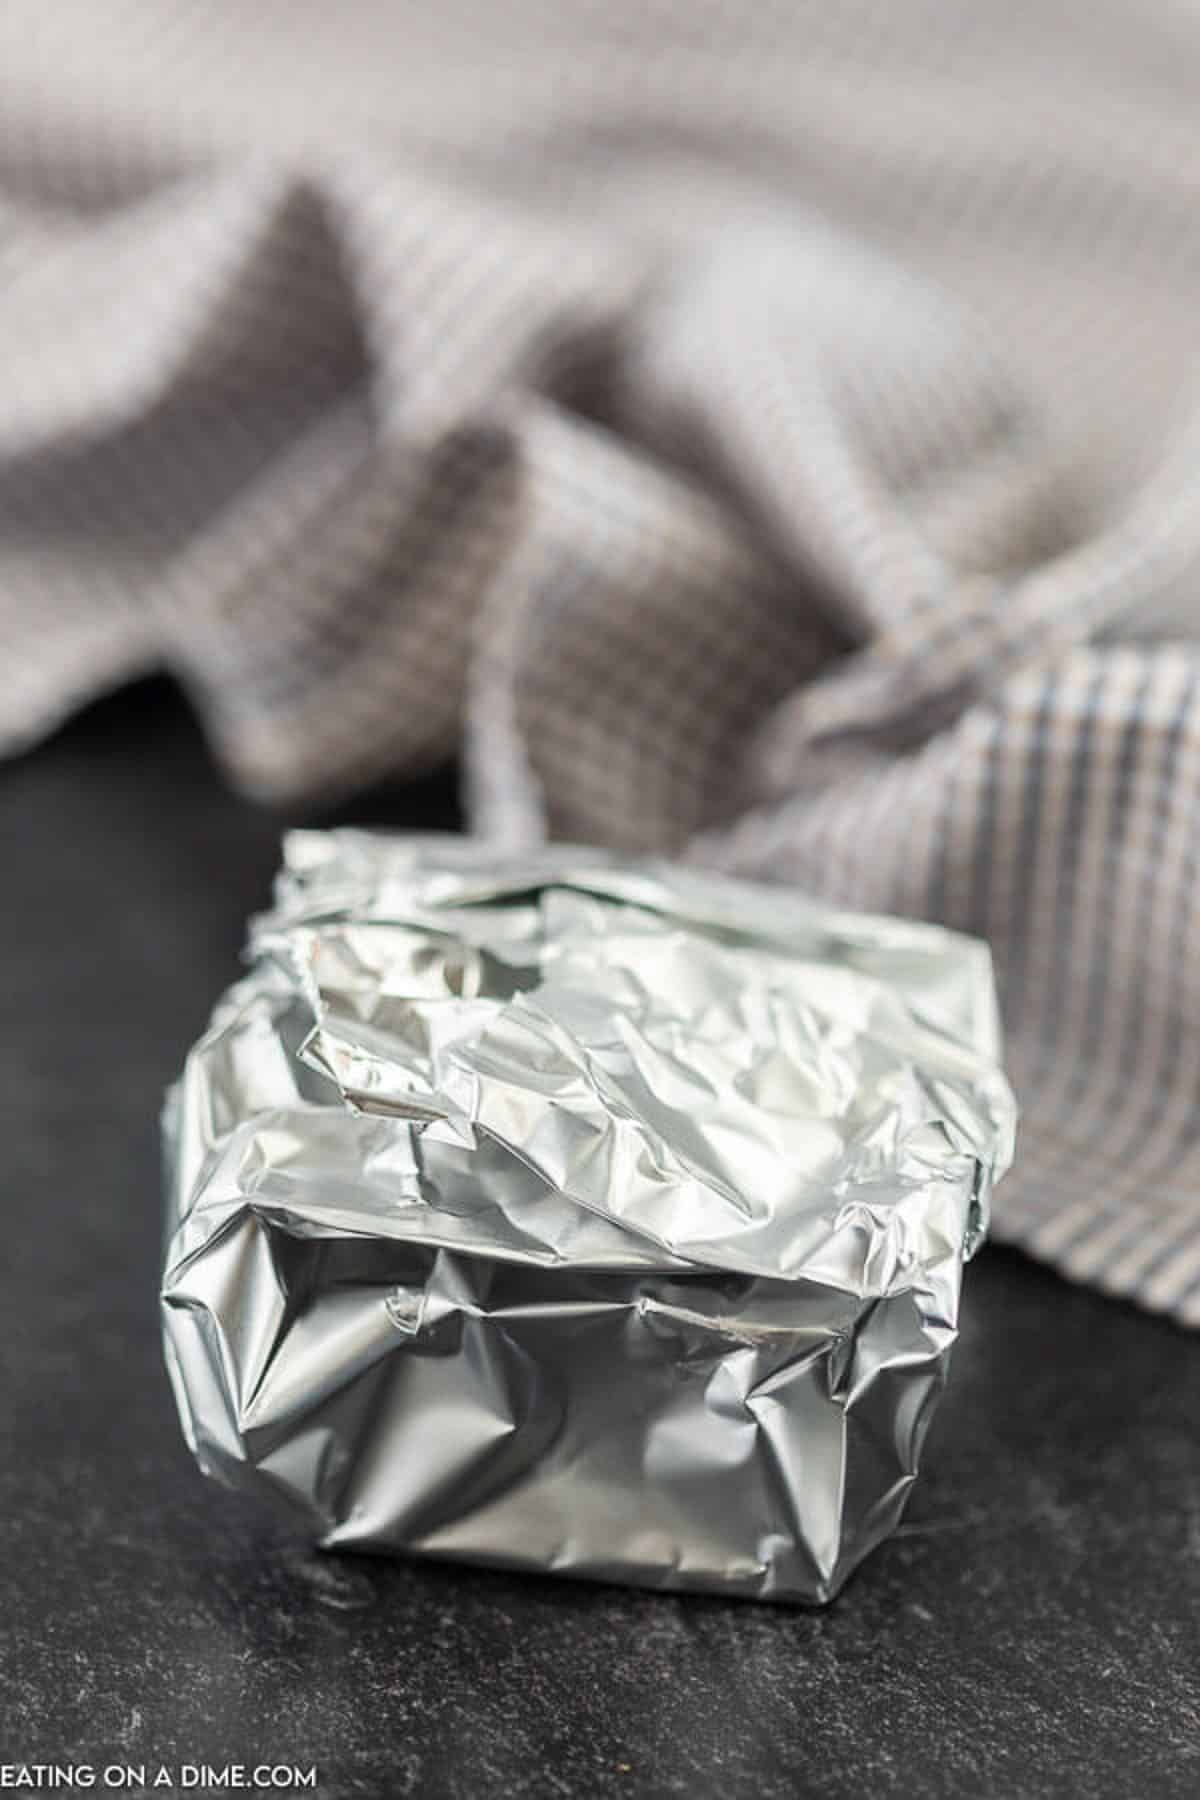 Foil wrapped completely around the assembled foil ready to grill.  